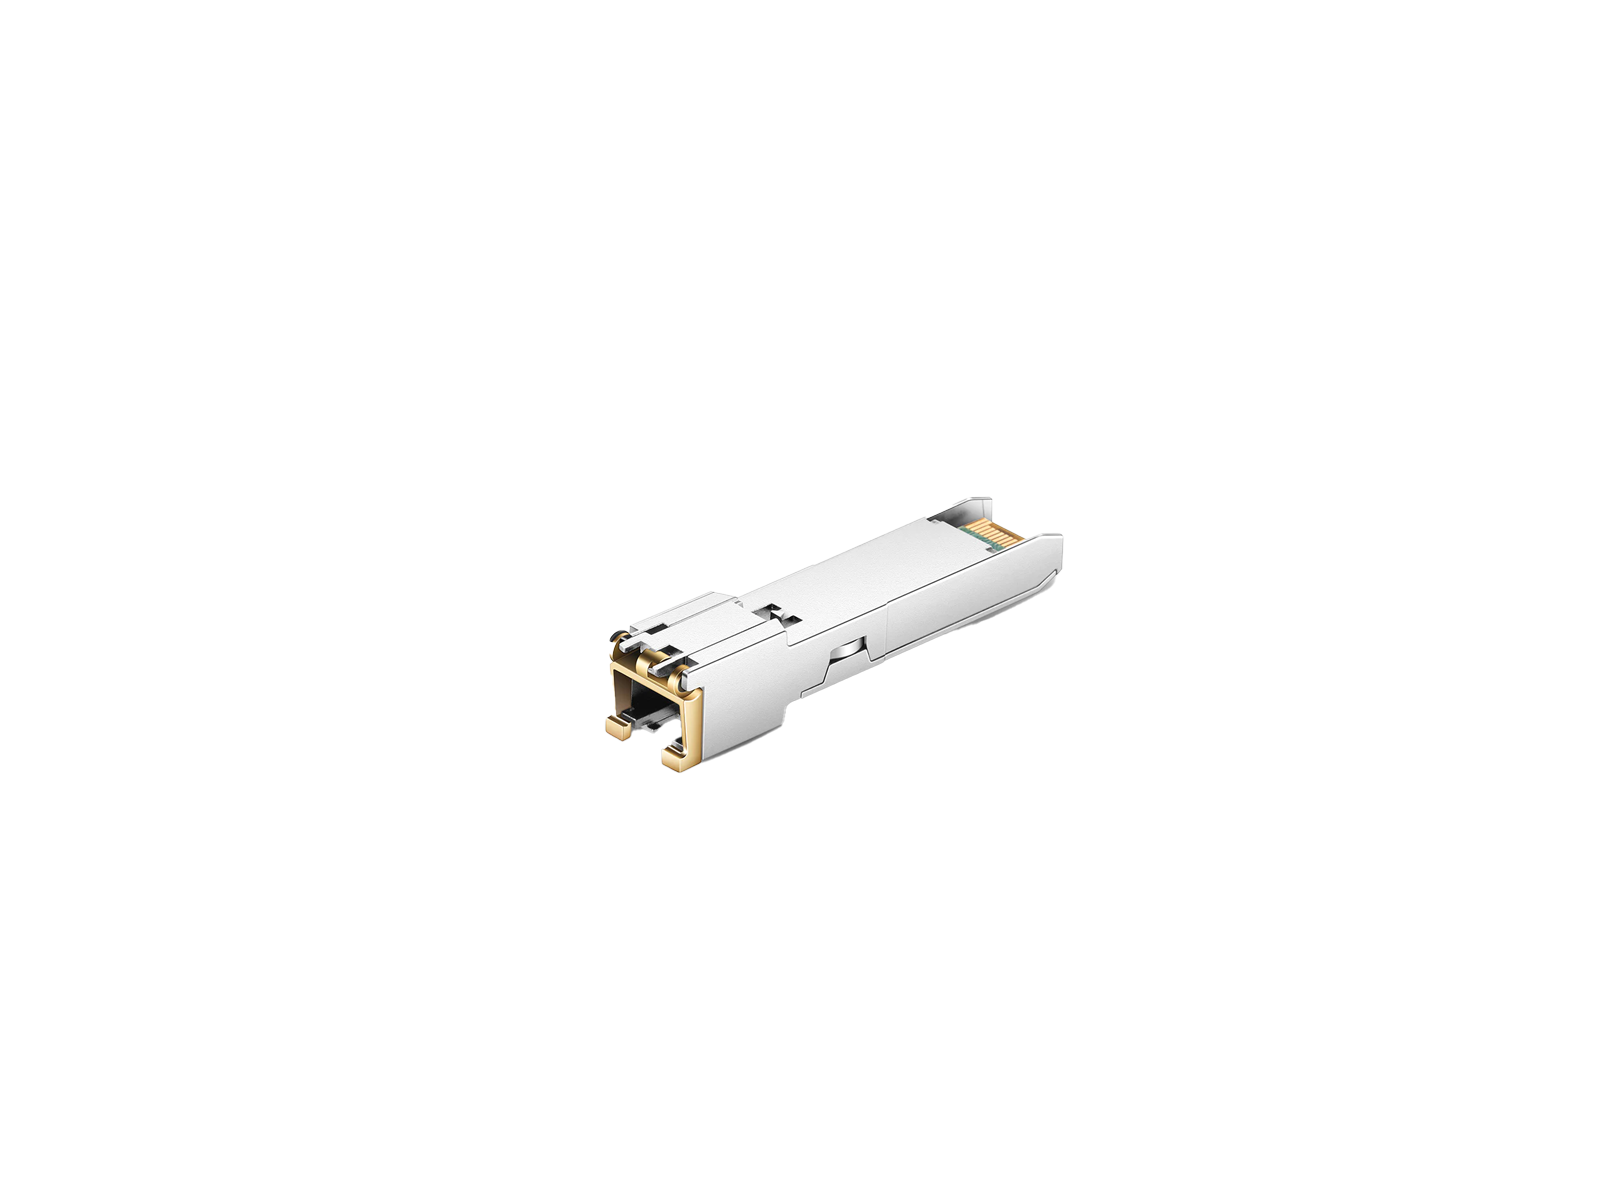 HPE JD061A X125 SFP LH4 1250Mbps LC-LC Single-Mode SMF 1310nm 40km Transceiver